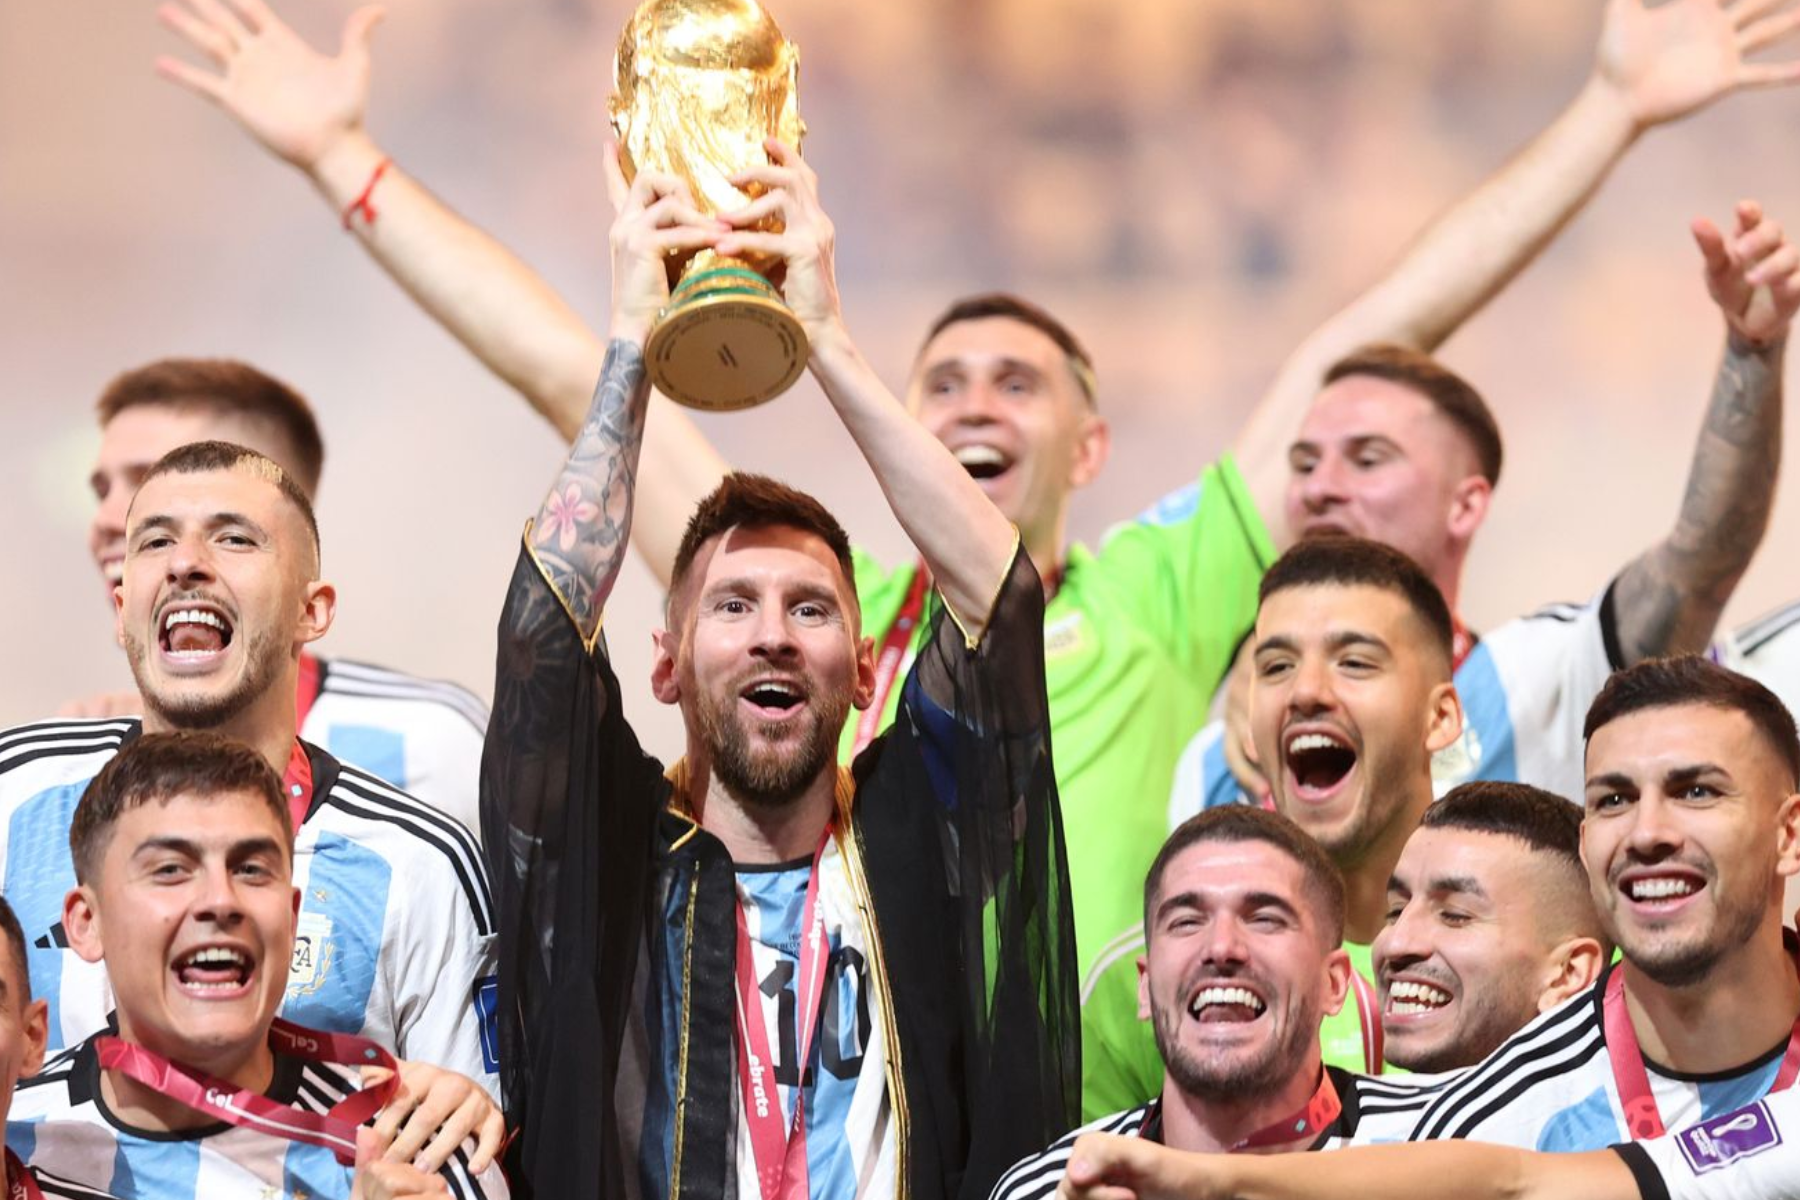 Argentina Won Their Third World Cup, Fulfilling Lionel Messi's Dream